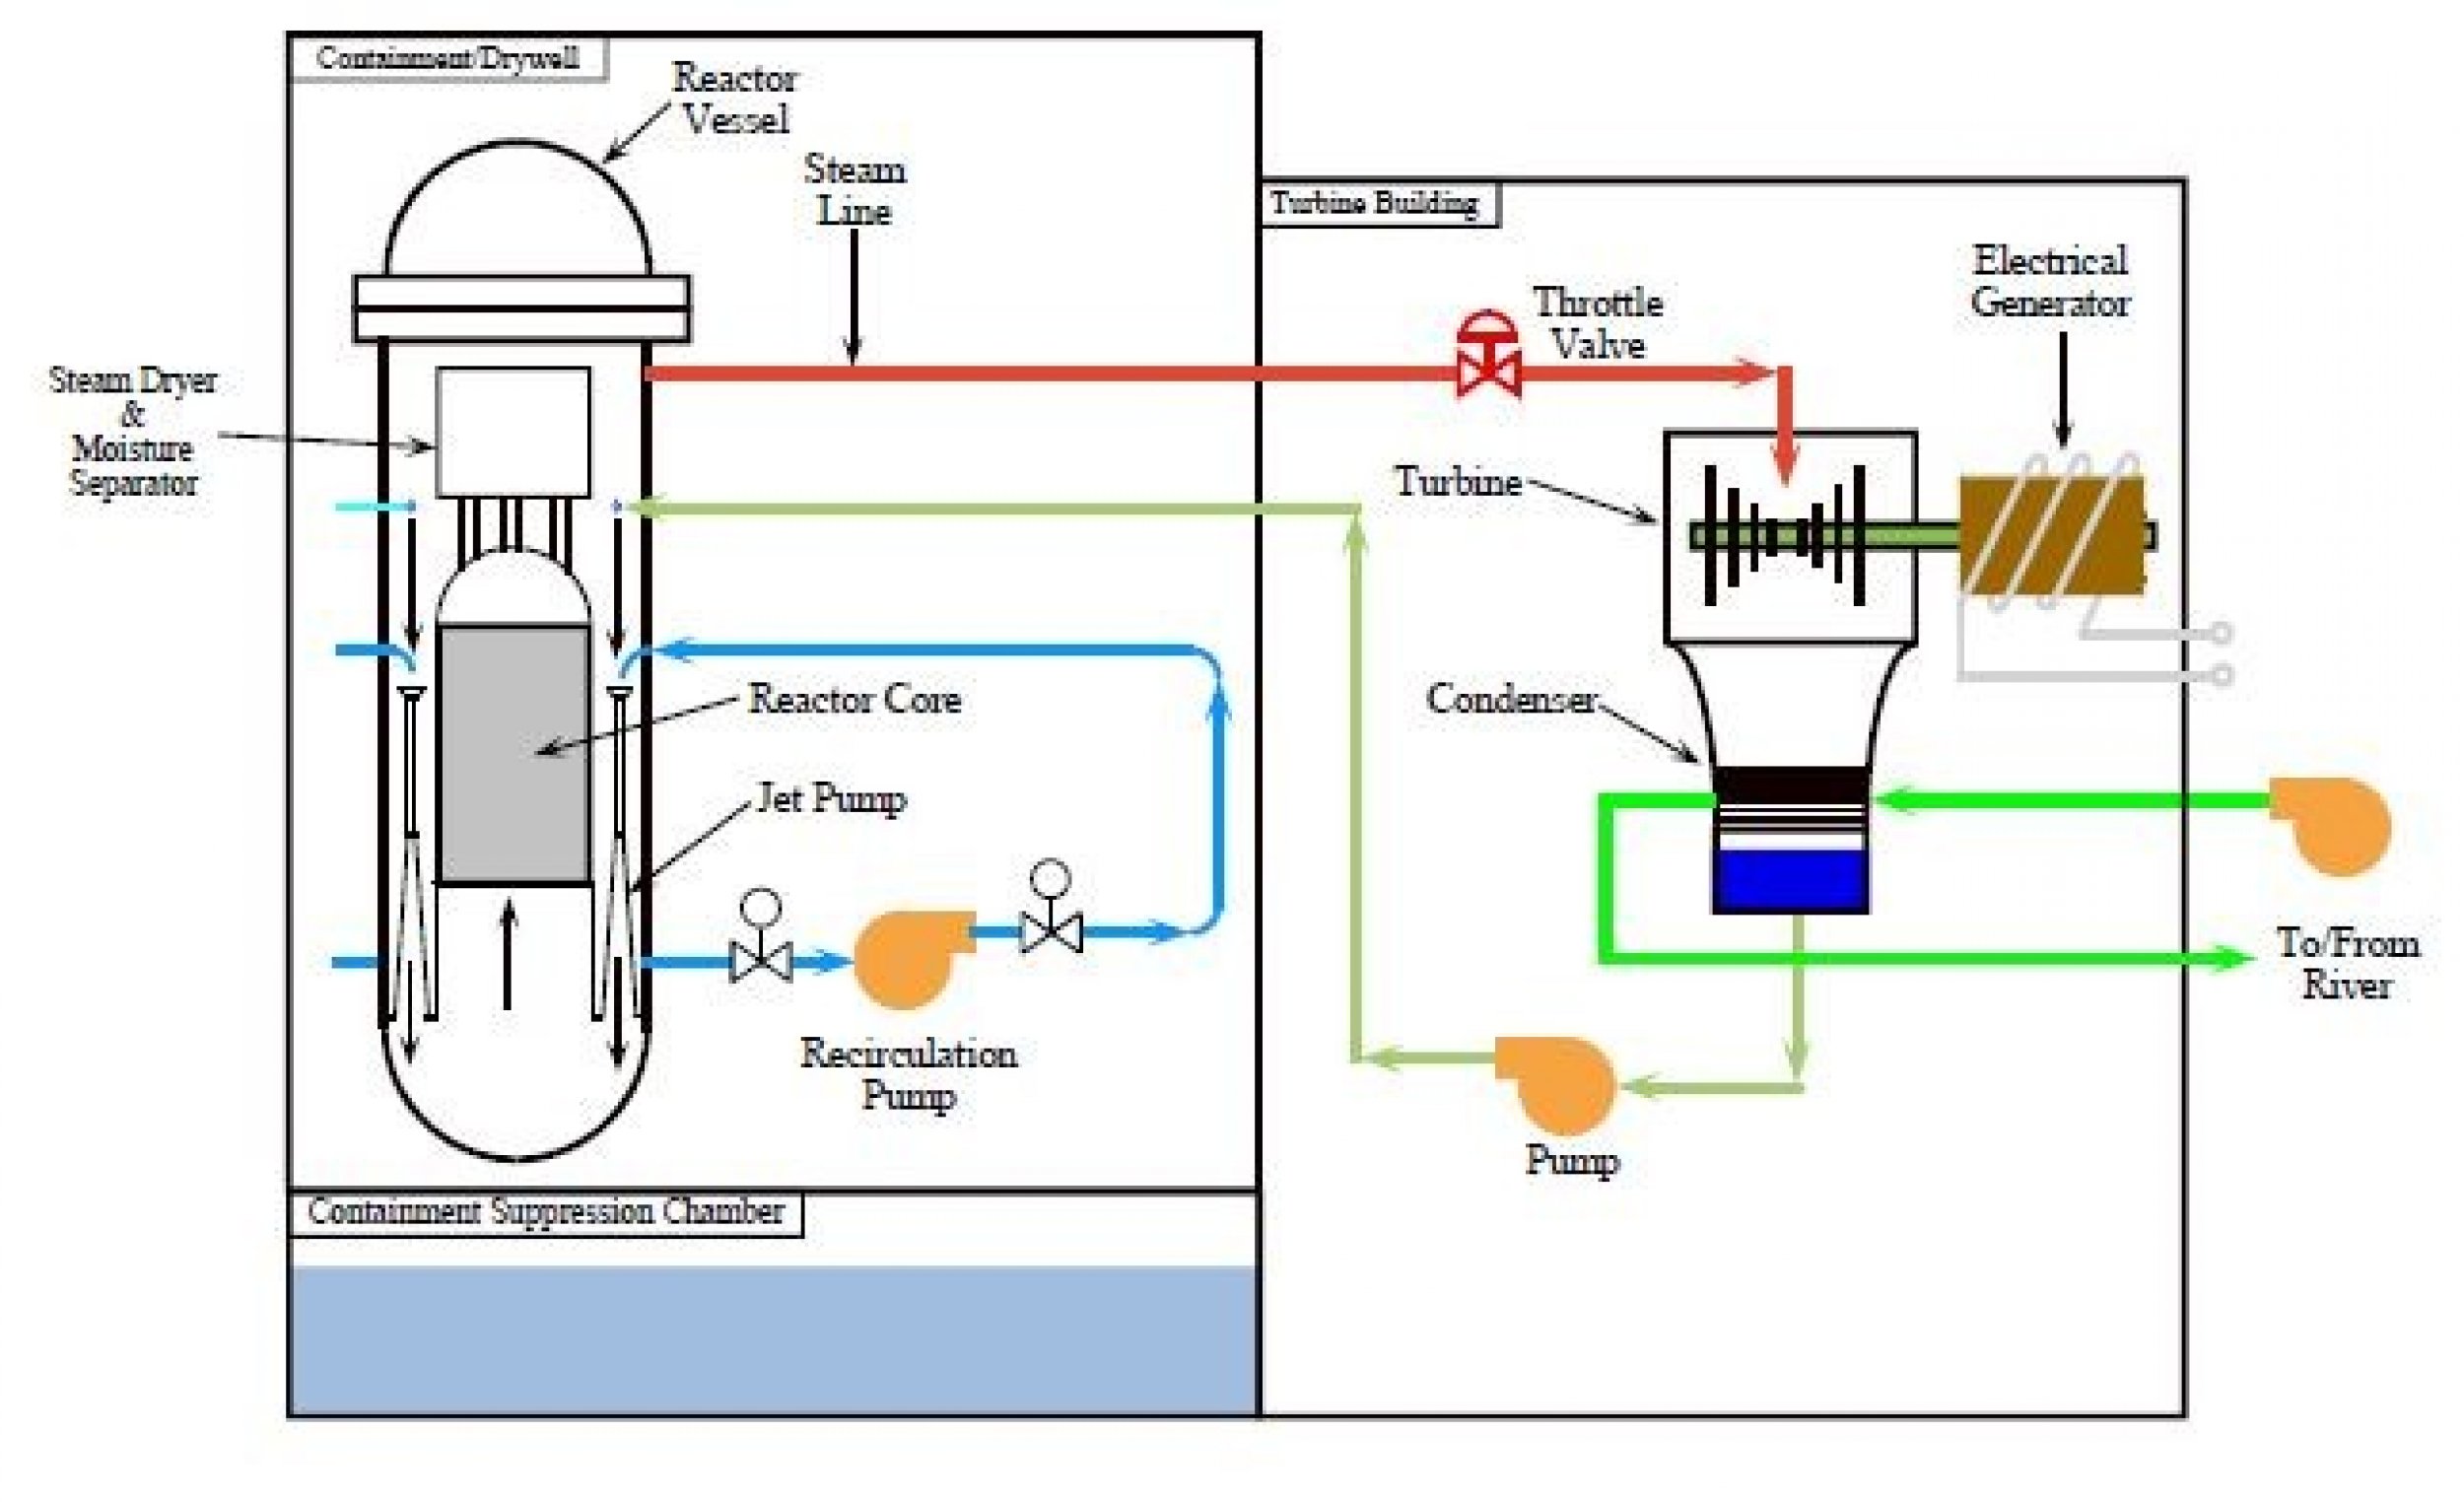 Boiling Water Reactor